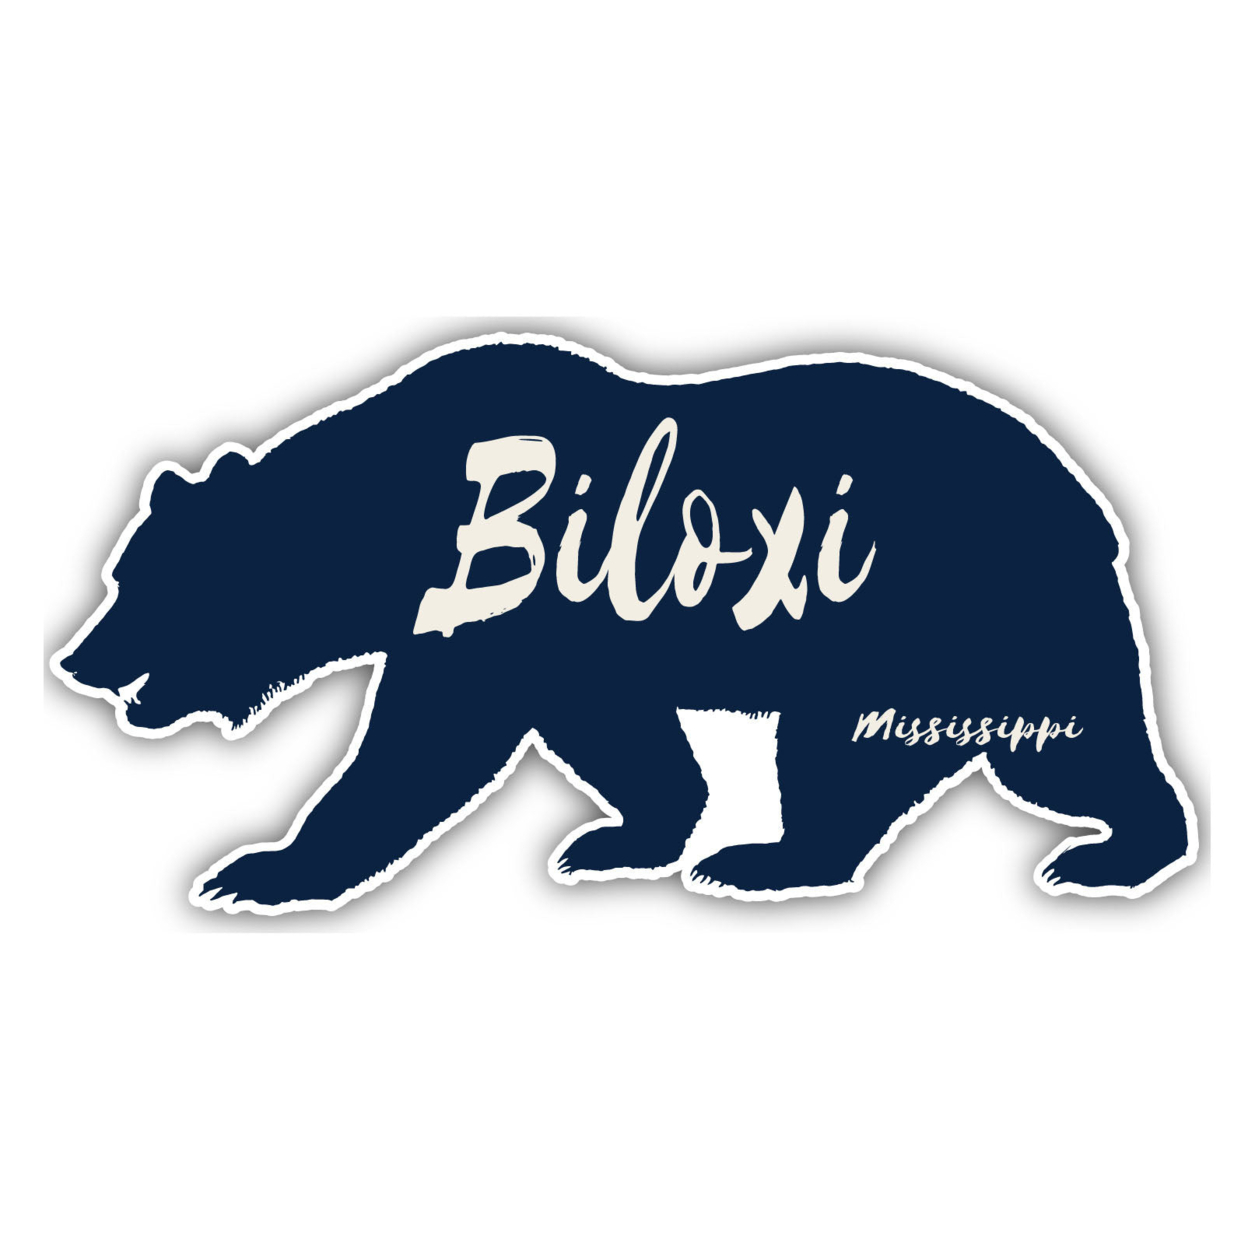 Biloxi Mississippi Souvenir Decorative Stickers (Choose Theme And Size) - 4-Pack, 10-Inch, Tent